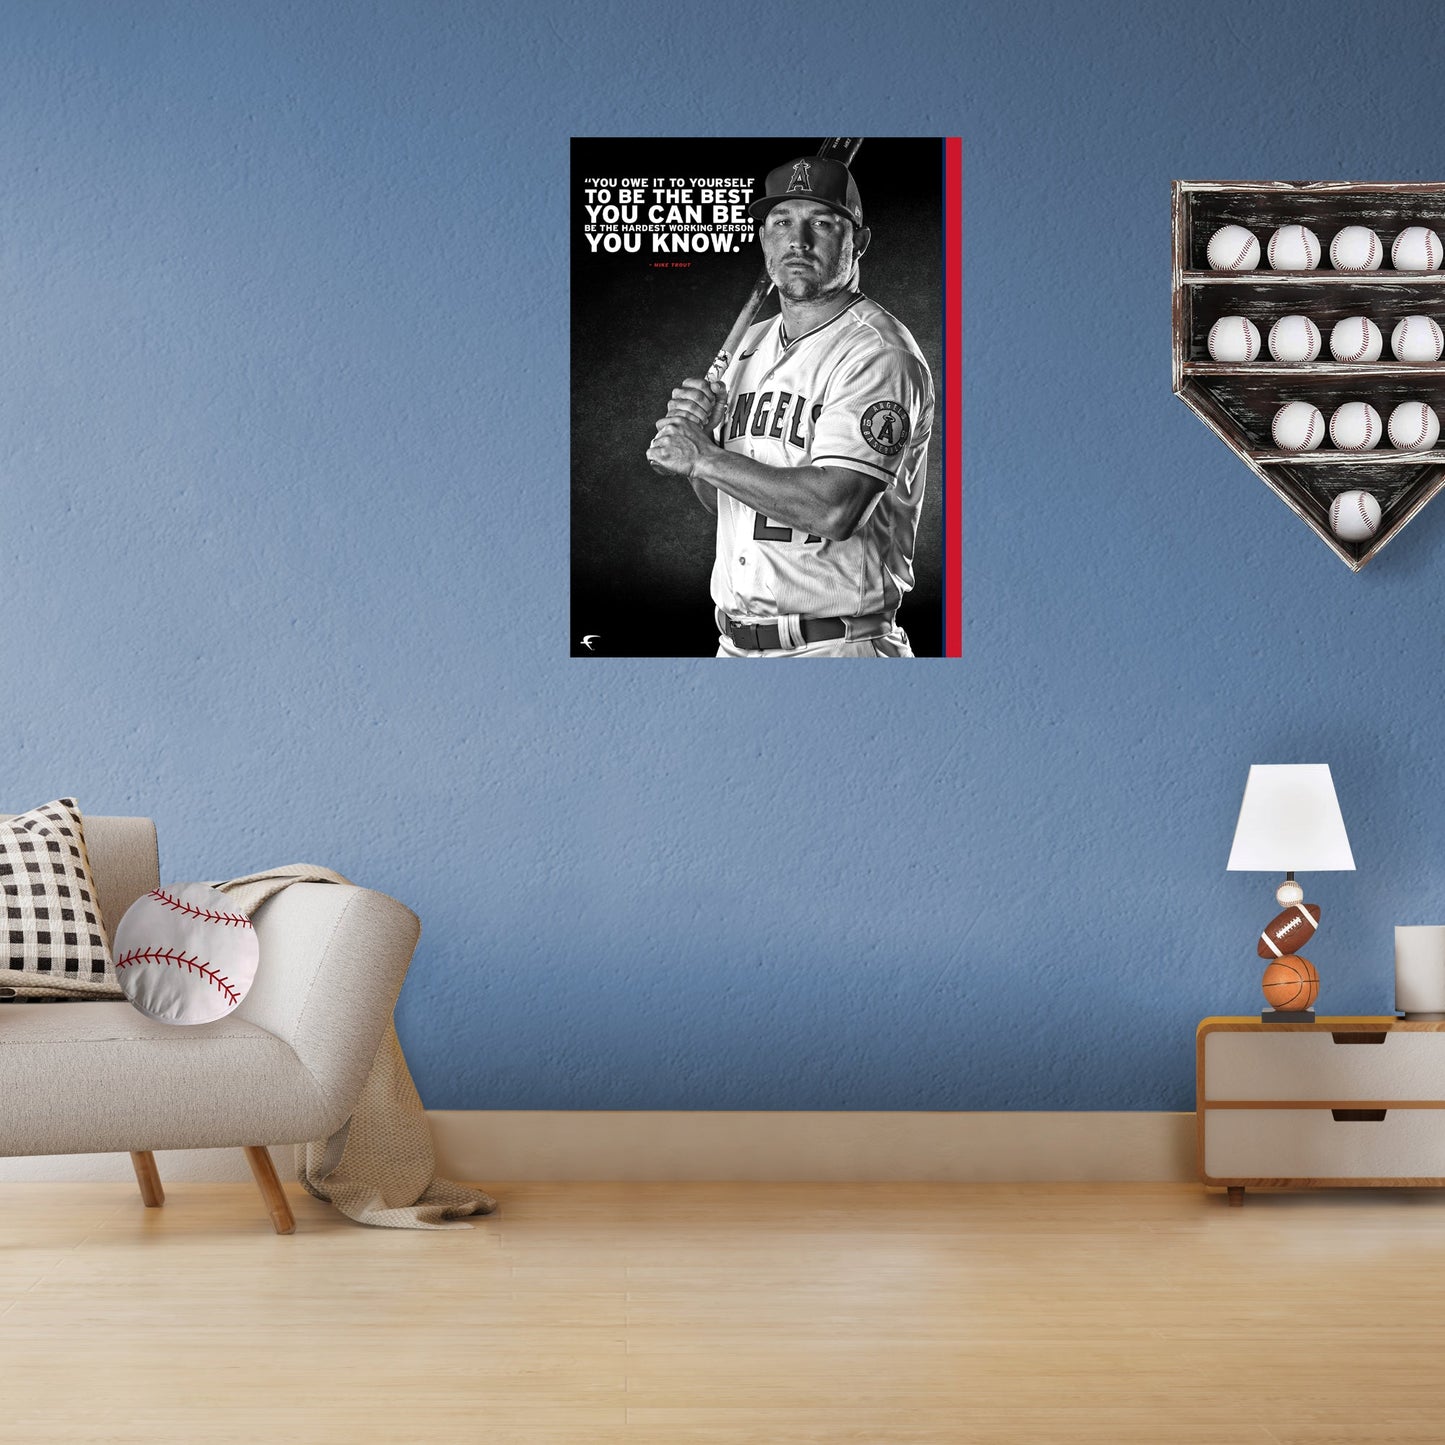 Los Angeles Angels: Mike Trout Inspirational Poster - Officially Licensed MLB Removable Adhesive Decal